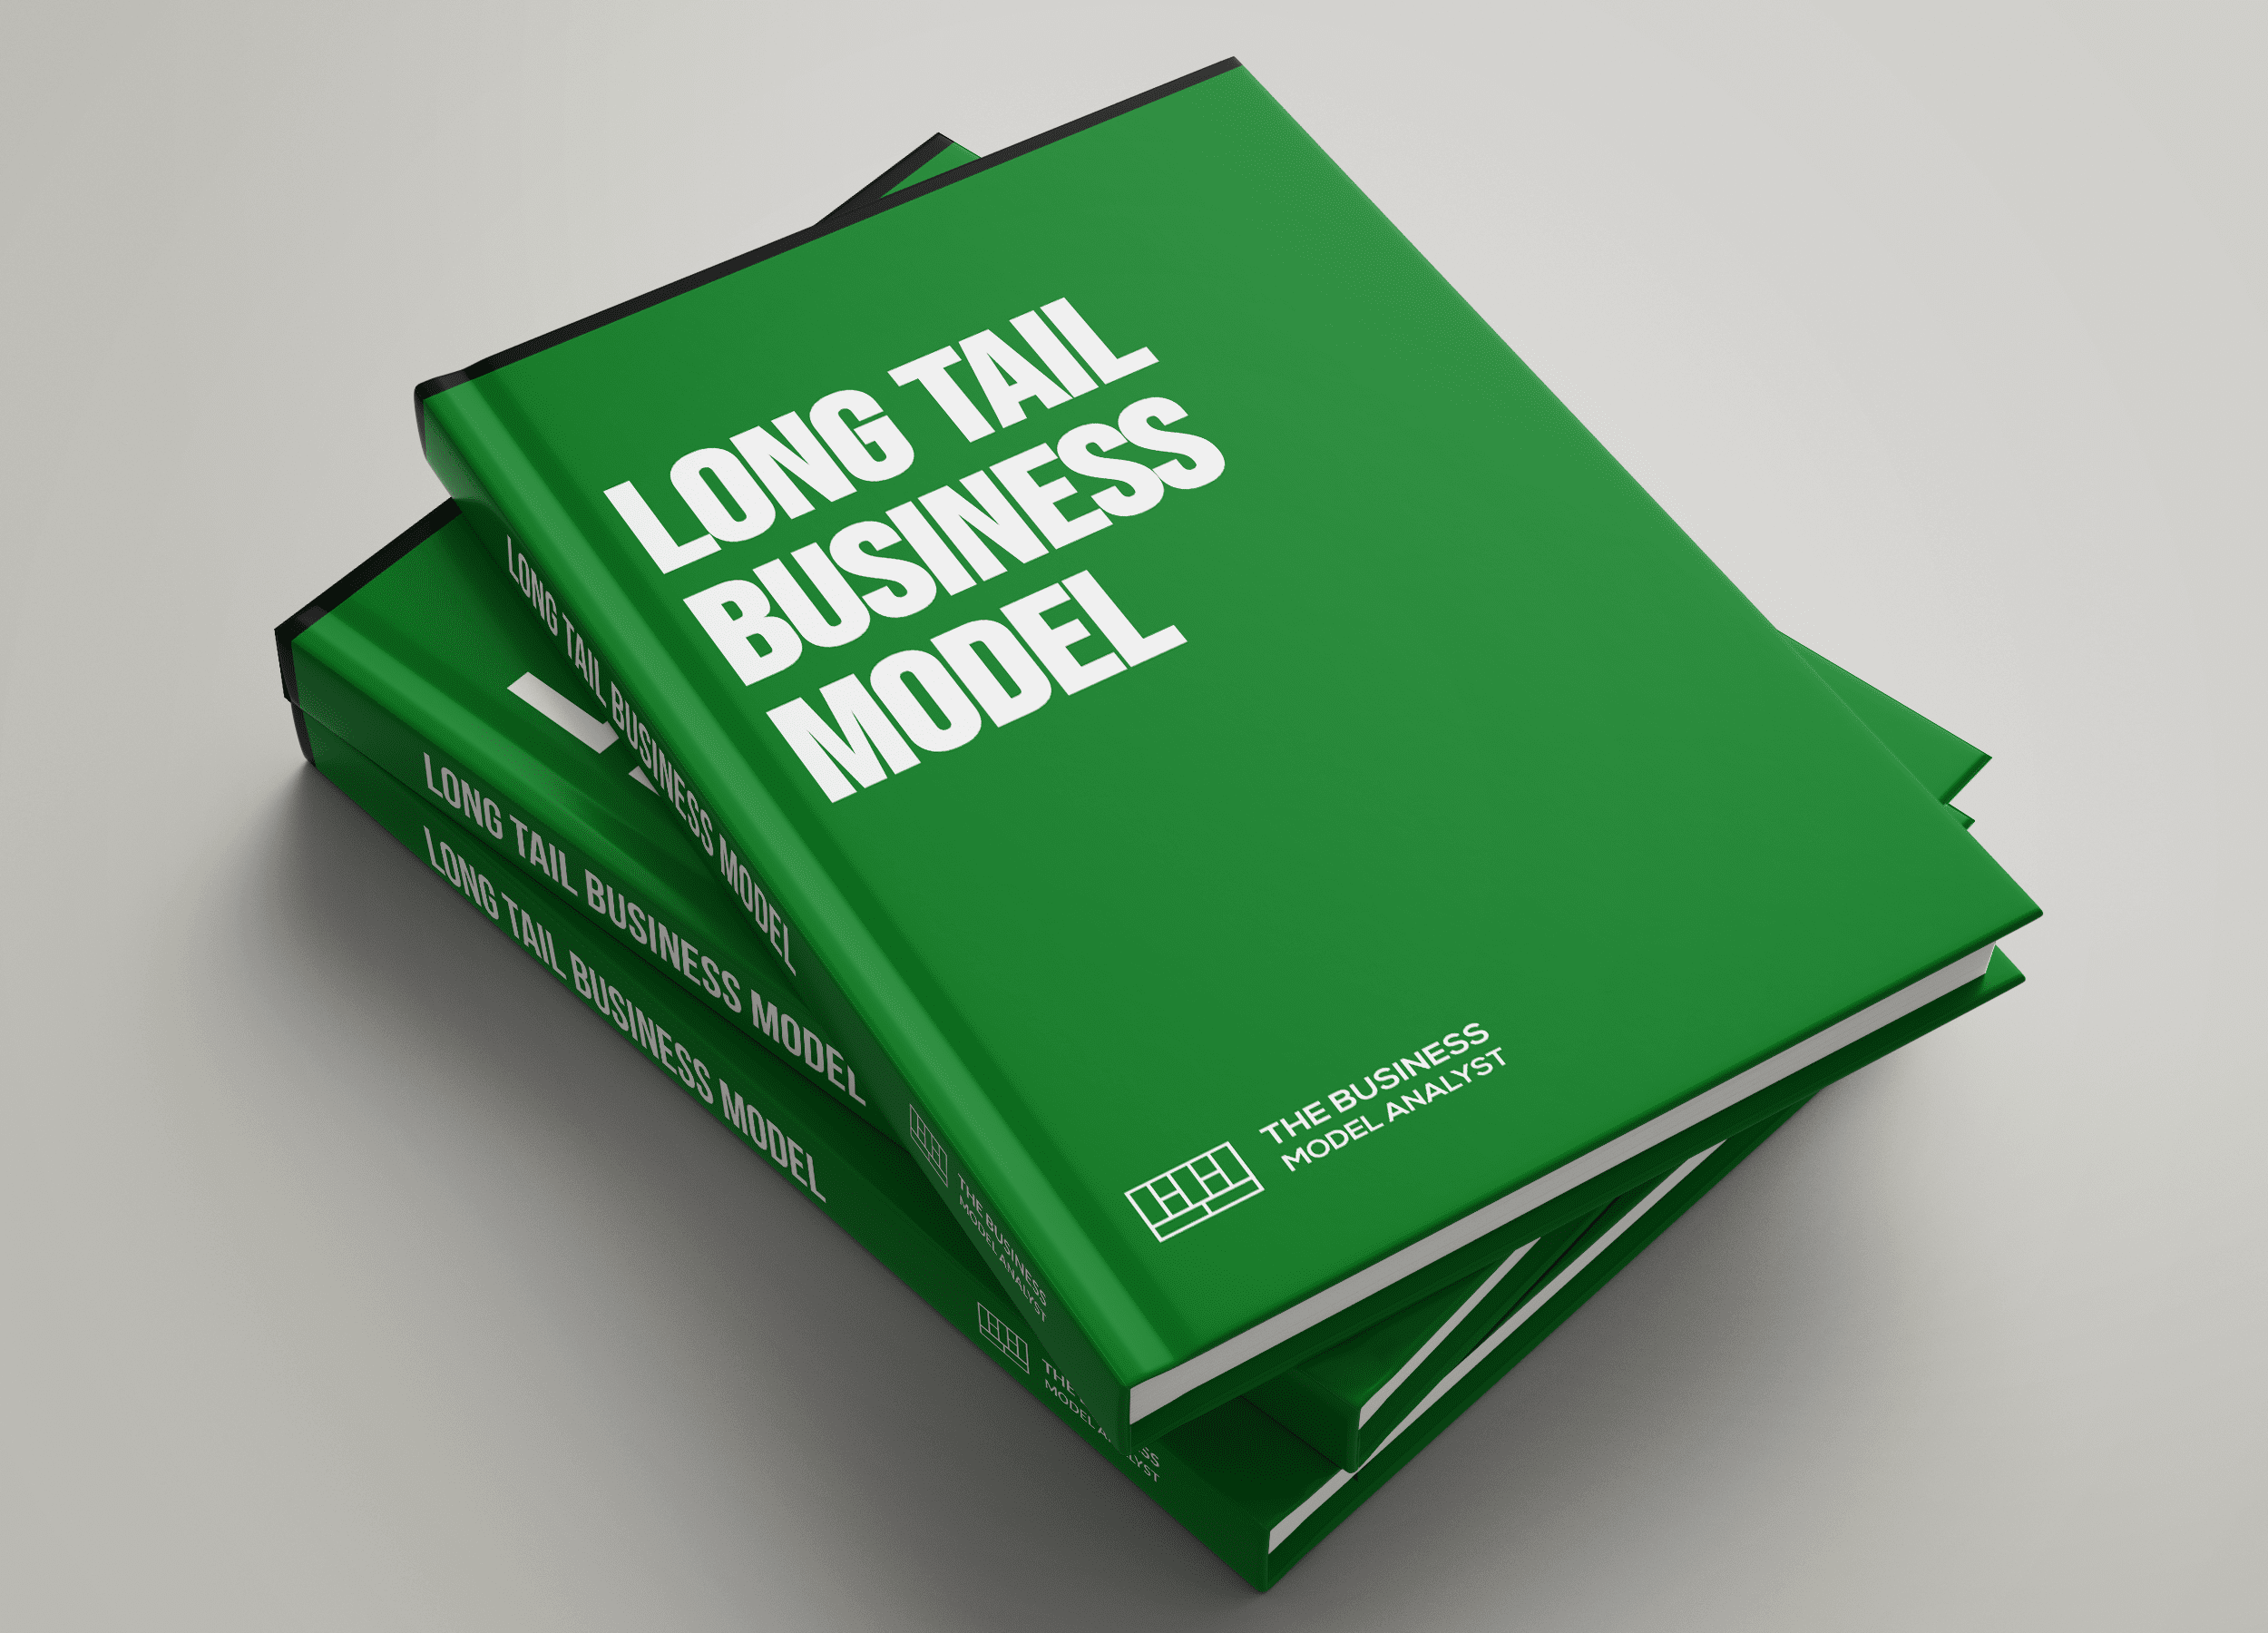 Long Tail Business Model Covers